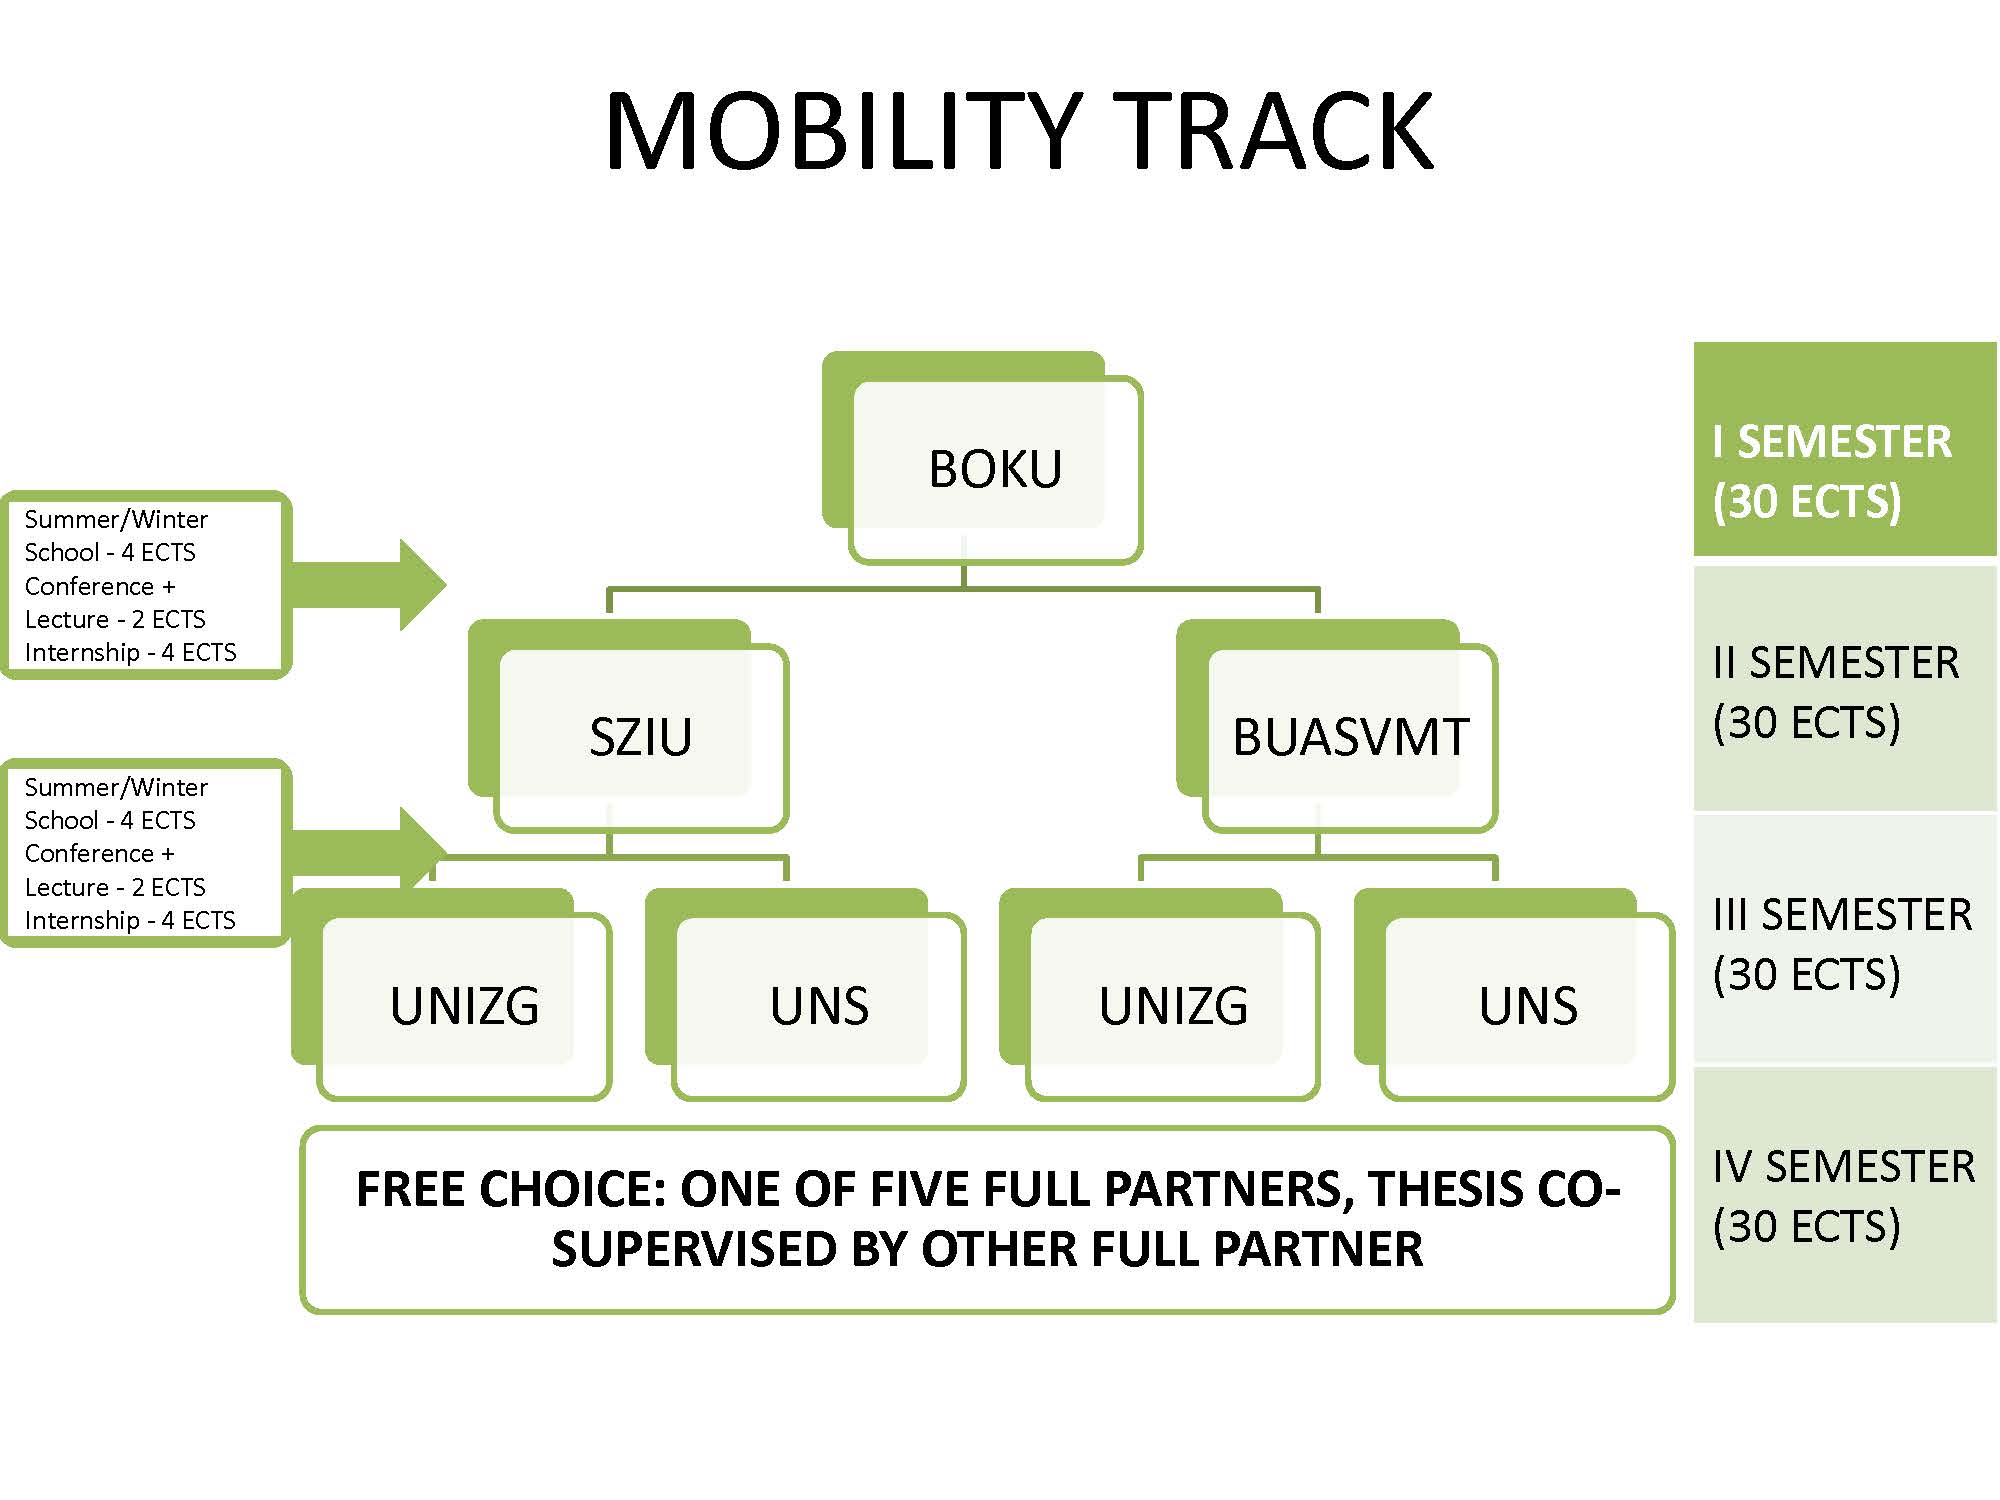 MOBILITY TRACK Update BOKU aktuell